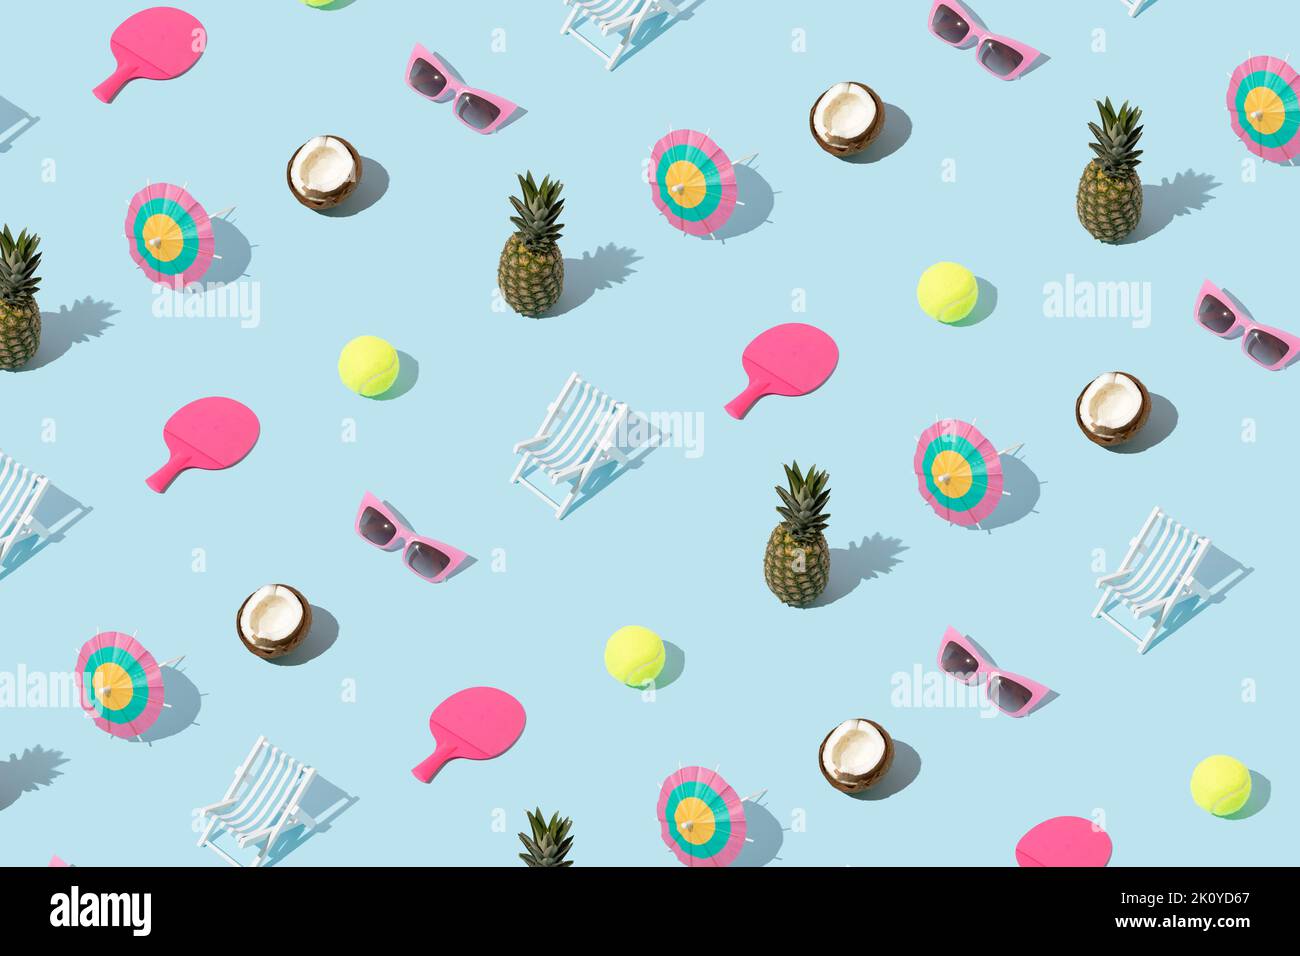 Summer pattern with colorful objects - pineapple, coconut, sunglasses, cocktail umbrella, tennis ball and racket, and beach chair on blue background. Stock Photo